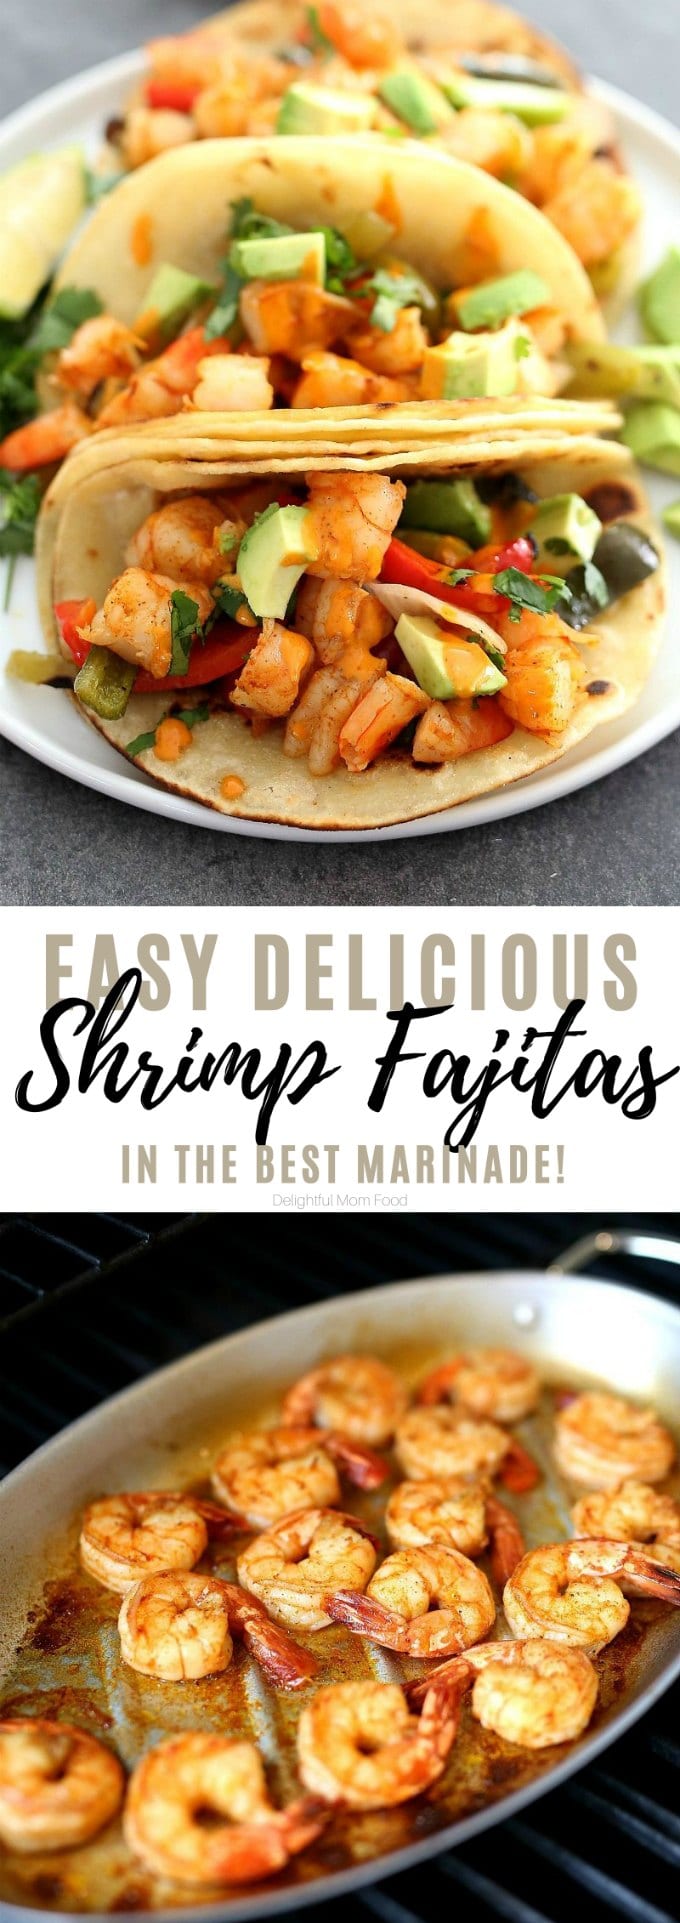 Healthy grilled shrimp fajitas with avocado, bell peppers, poblano pepper, onion and a drizzle of spicy salsa. This maple-glazed shrimp marinade is the best to use for all seafood dishes! #shrimpfajitas #shrimpfajitarecipe #shrimp #shrimpmarinade #main #dinner #tacos #fajitas #easy #quick #best #healthy #glutenfree #delightfulmomfood | Recipe at Delightful Mom Food